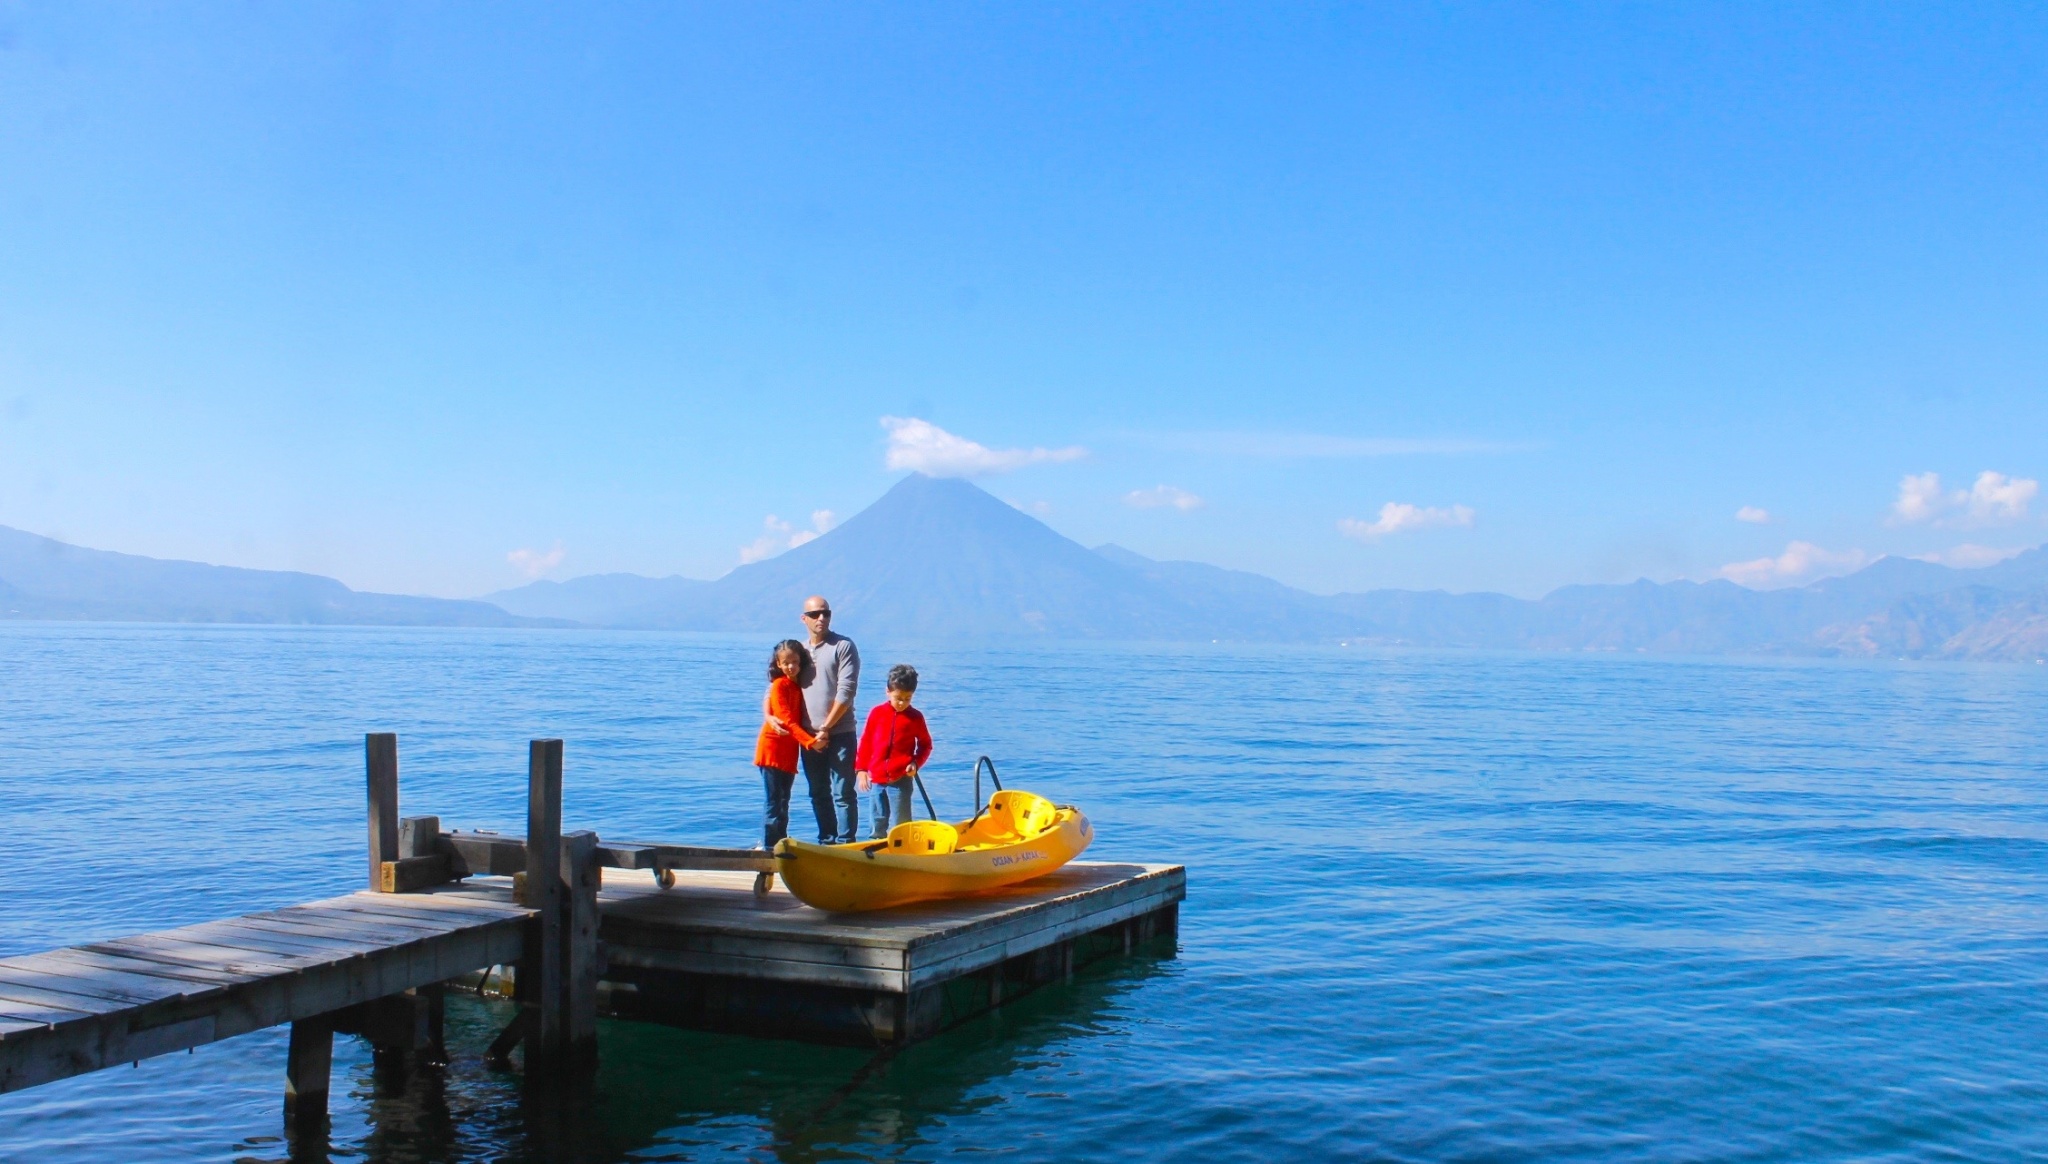 Lake Atitlán in Guatemala is truly a magical place